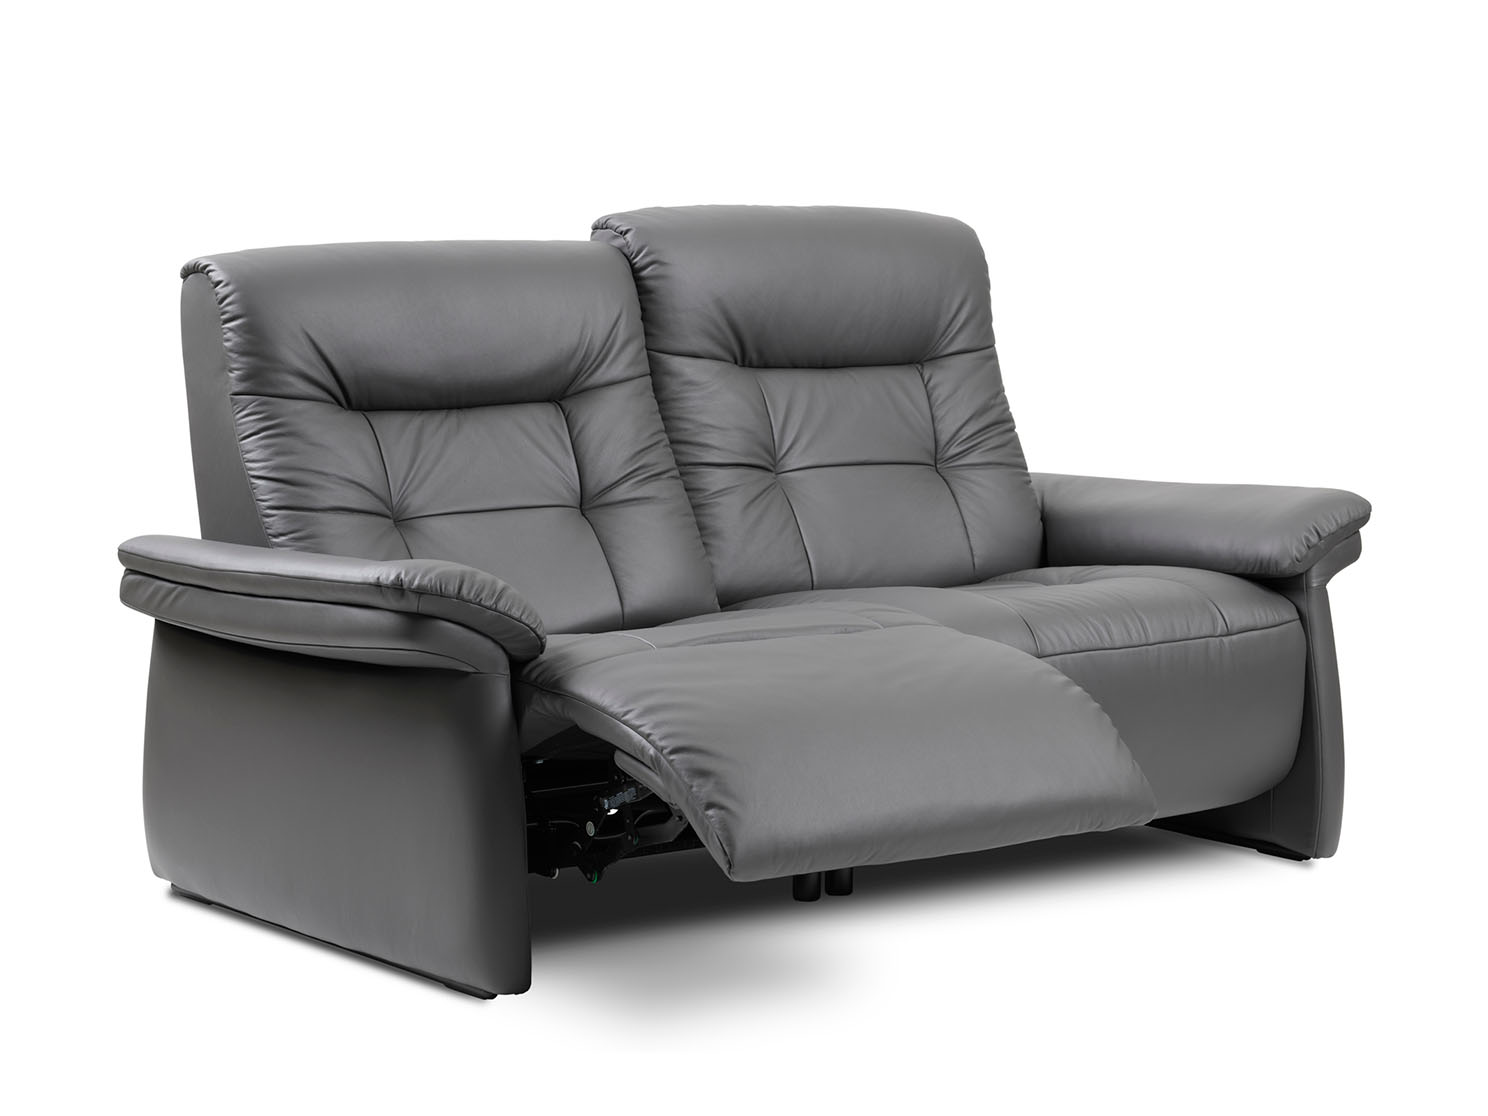 Stressless Mary sofa - two seater